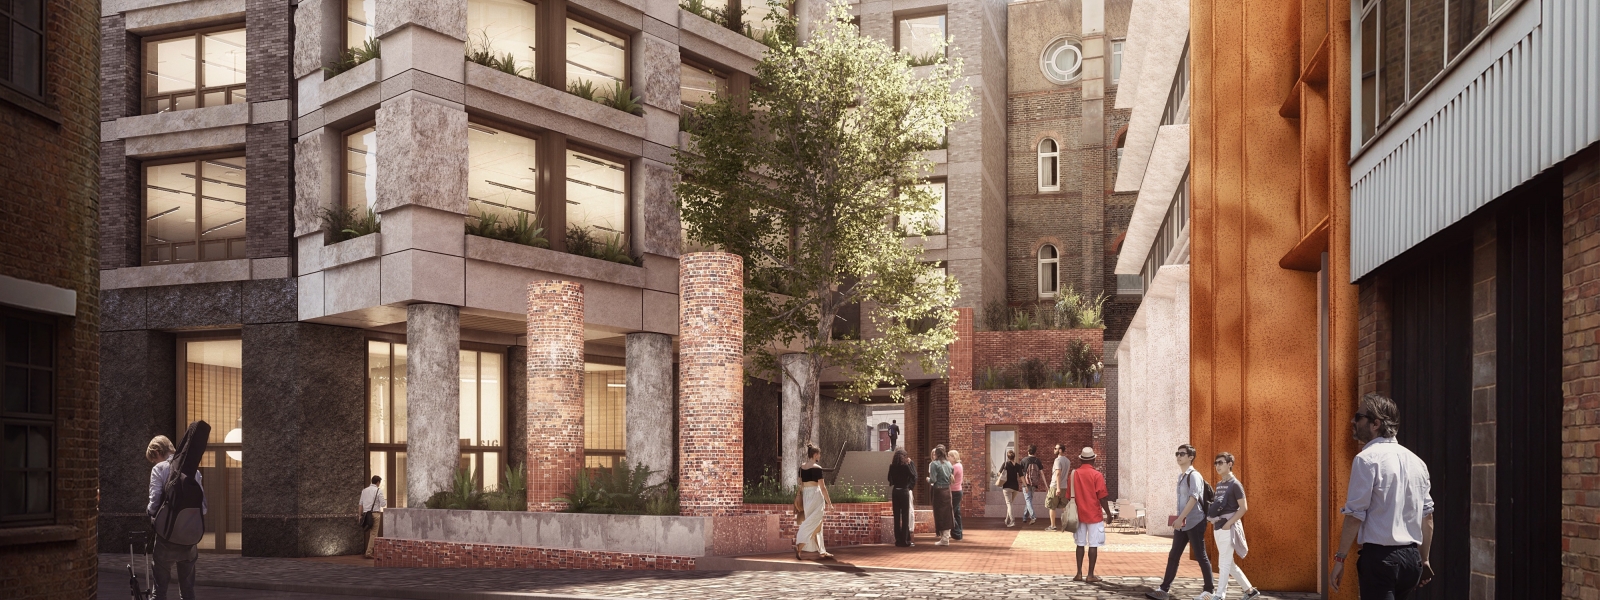 Groveworld secures approval for plans to revitalise the former home of the Royal Throat, Nose and Ear Hospital in London’s Knowledge Quarter